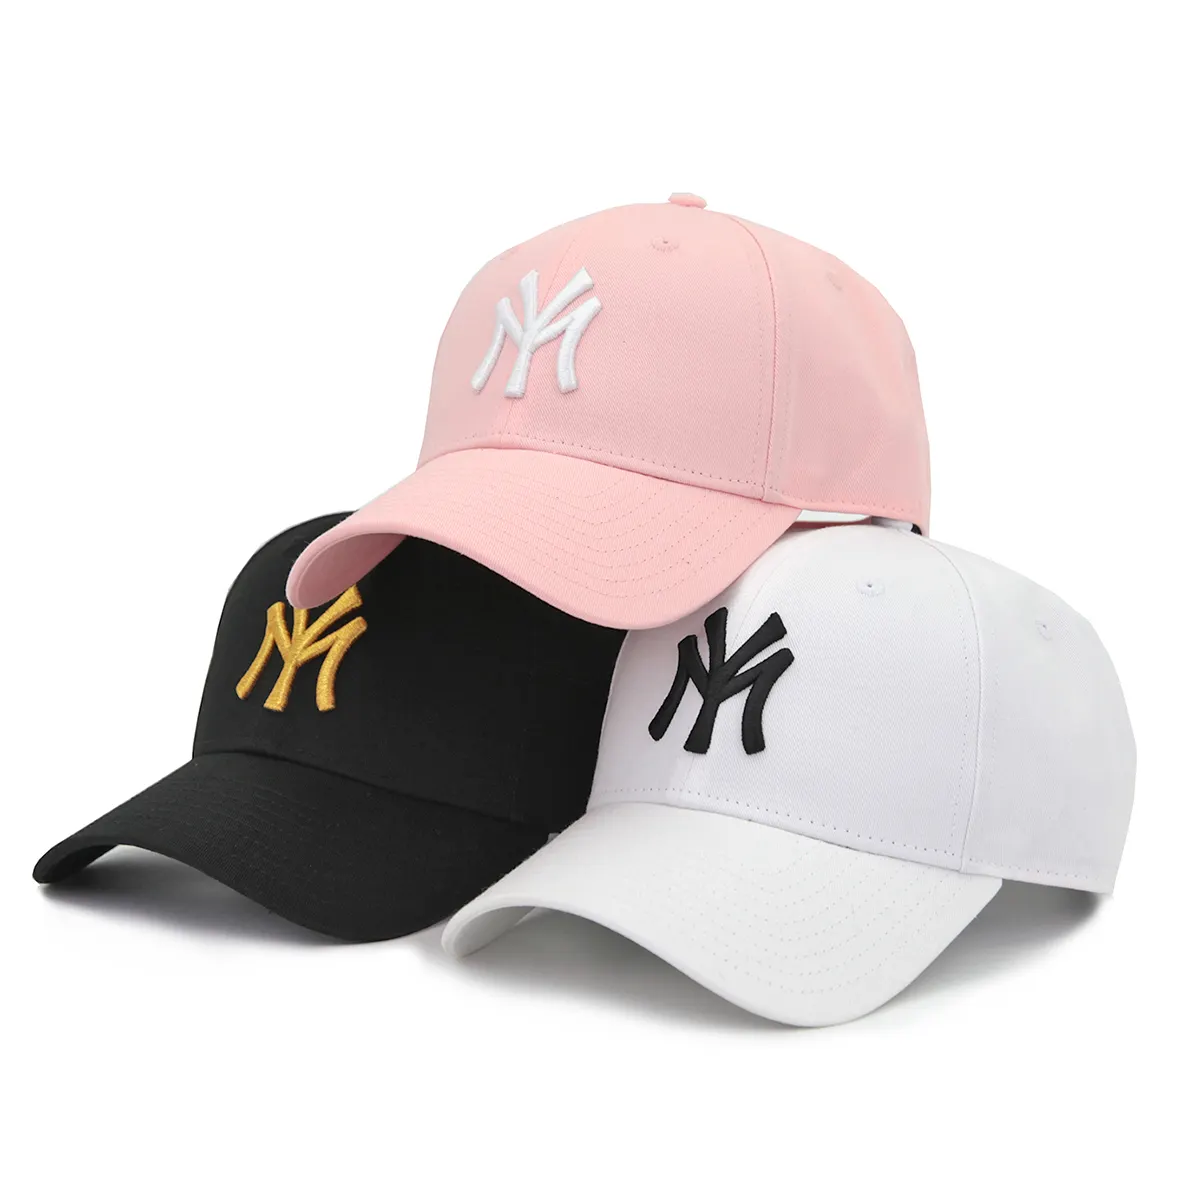 Wholesale brand quality new fashion era unisex baseball cap hat Outdoor Luxury hat with 3d letter embroidery logo